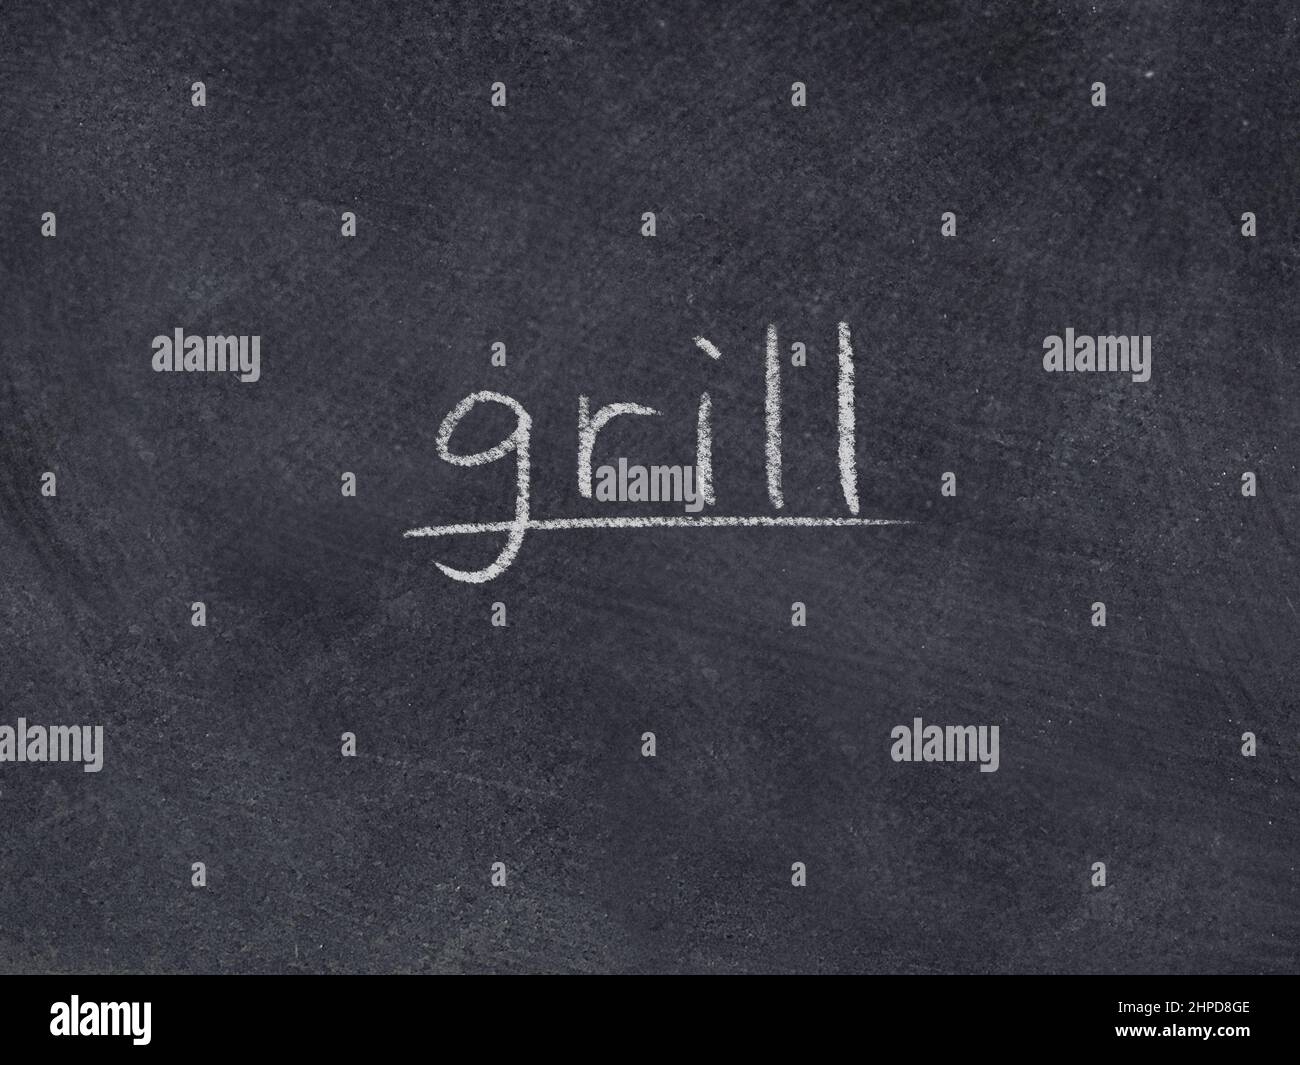 grill concept word on blackboard background Stock Photo